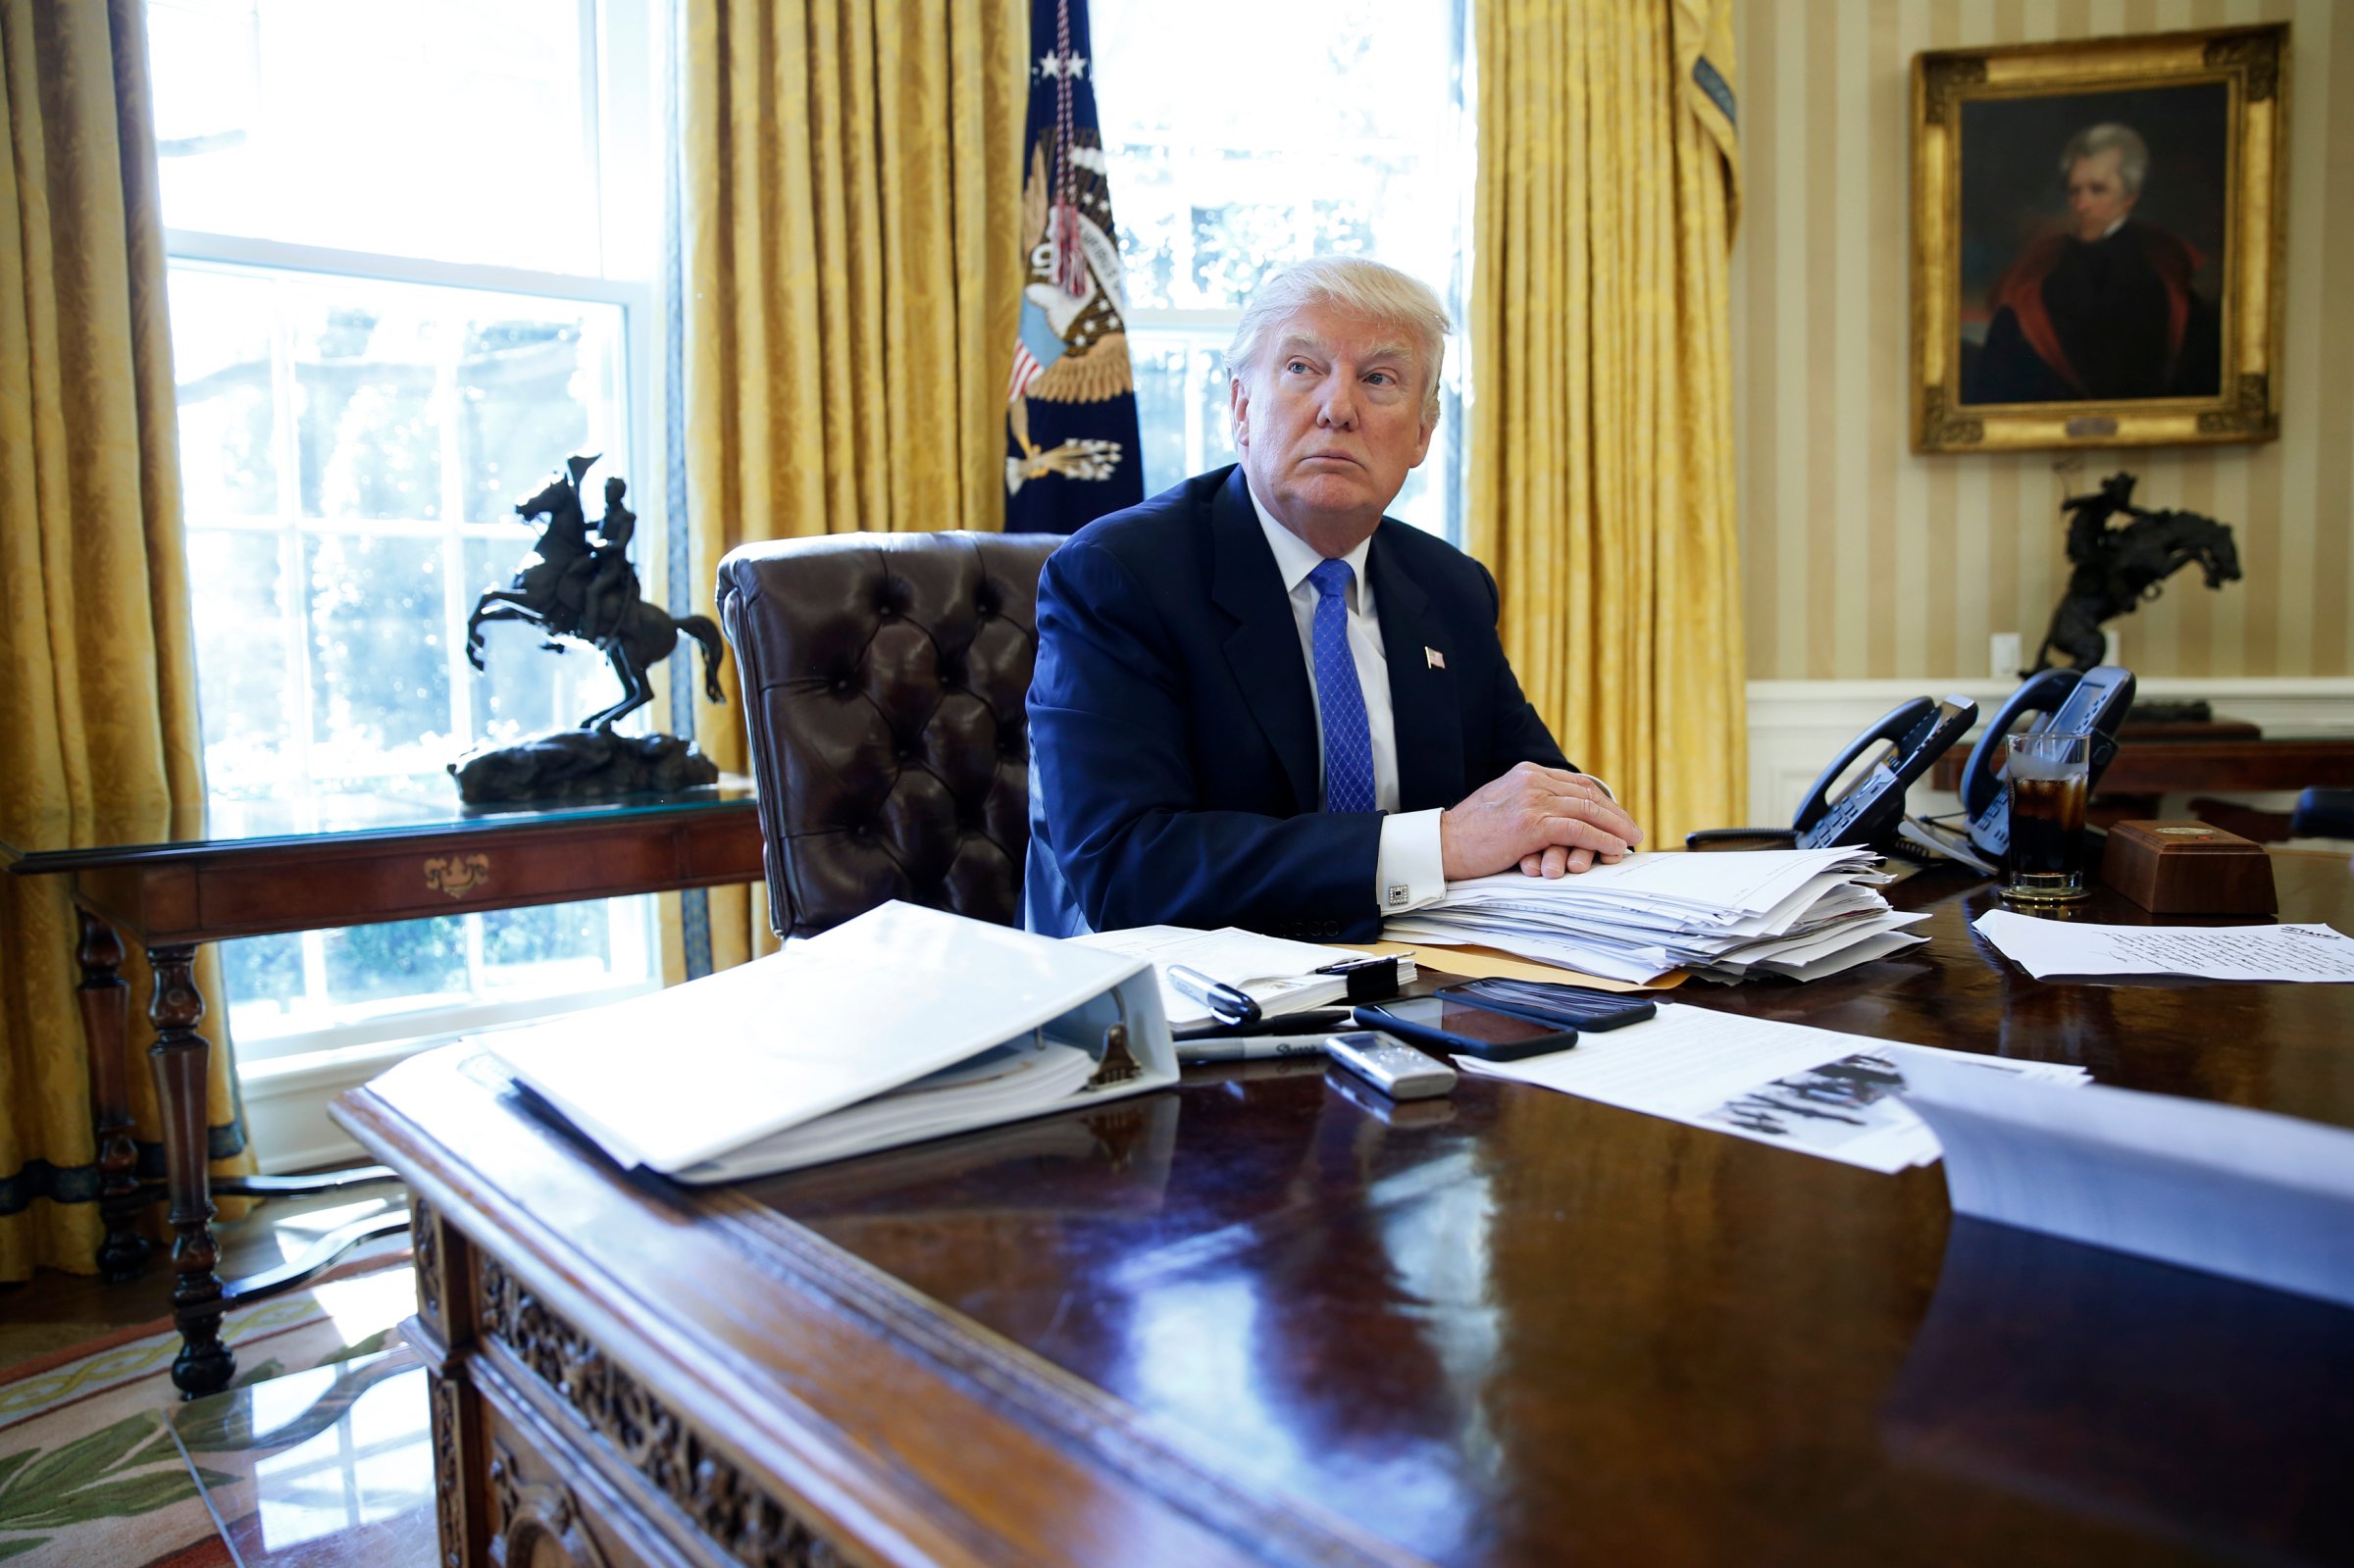 U.S. President Trump is interviewed by Reuters in the Oval Office at the White House in Washington